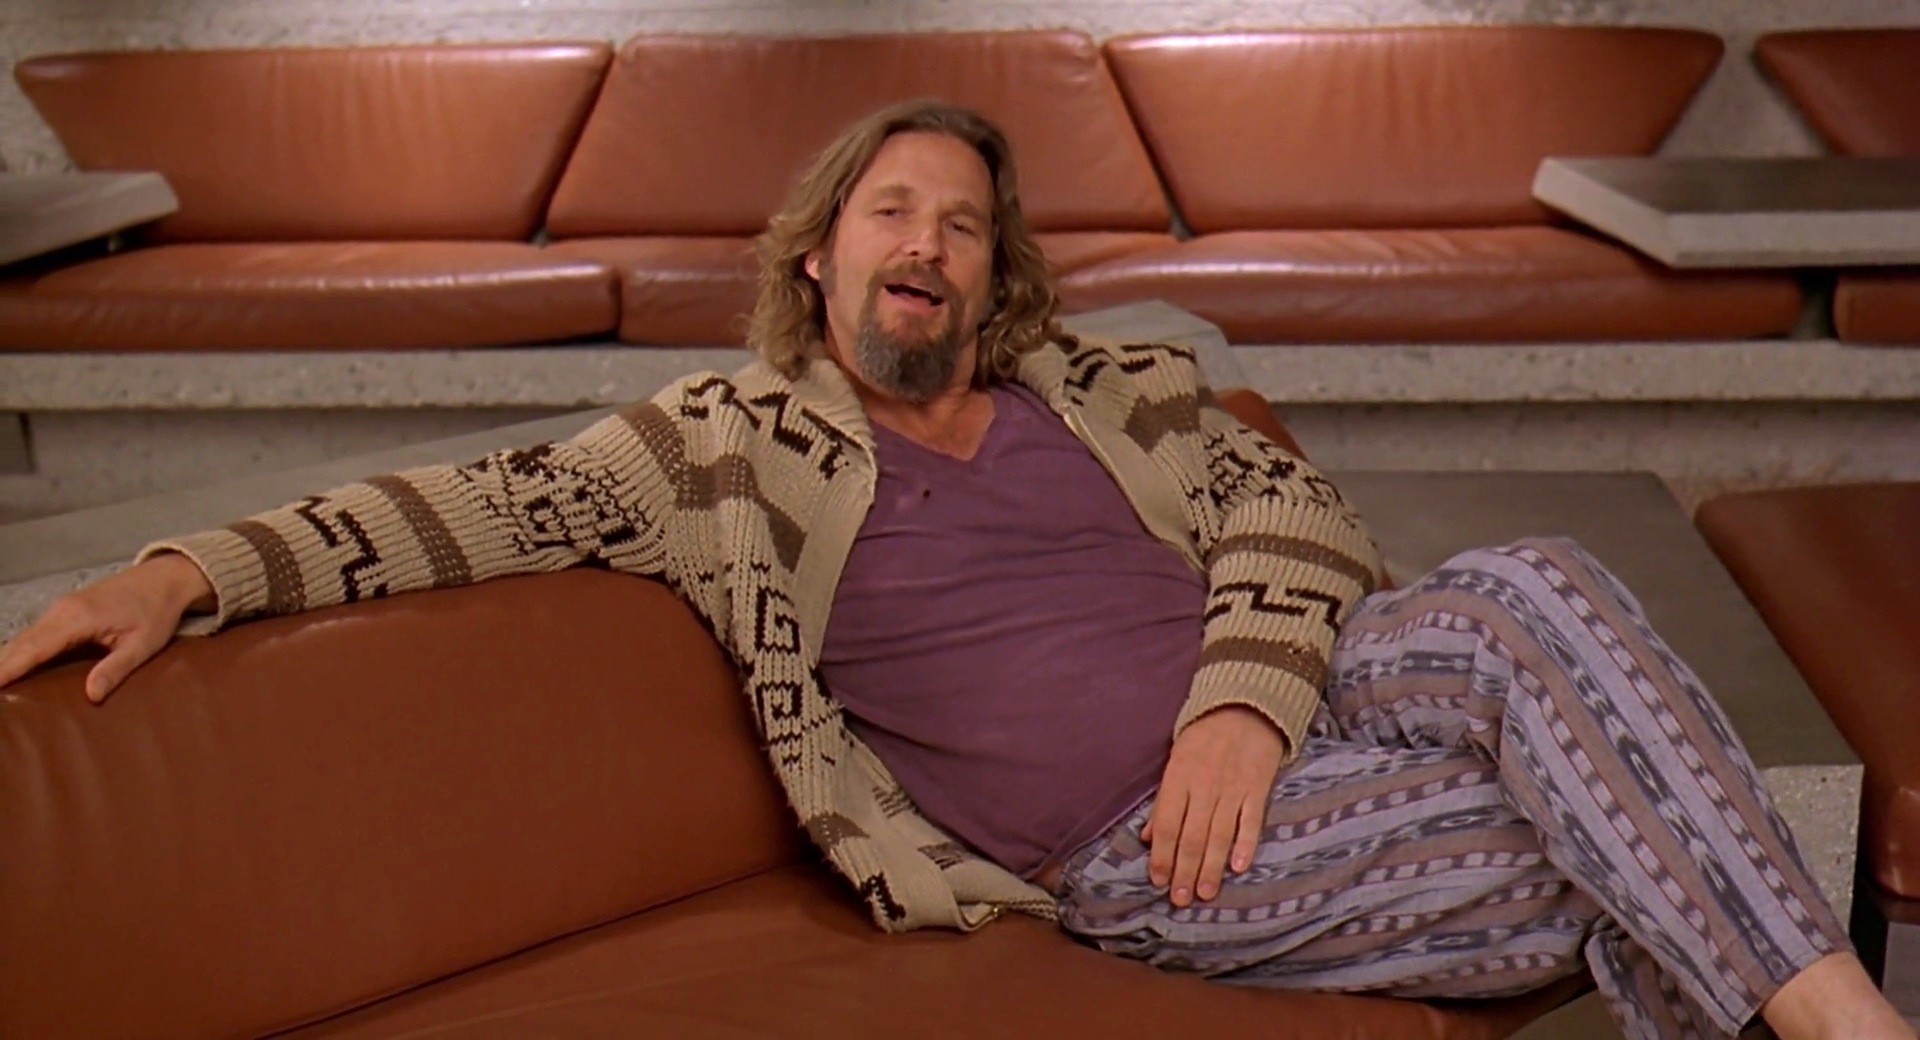 The Dude makes for a fine Halloween costume for your resident pot smokers.